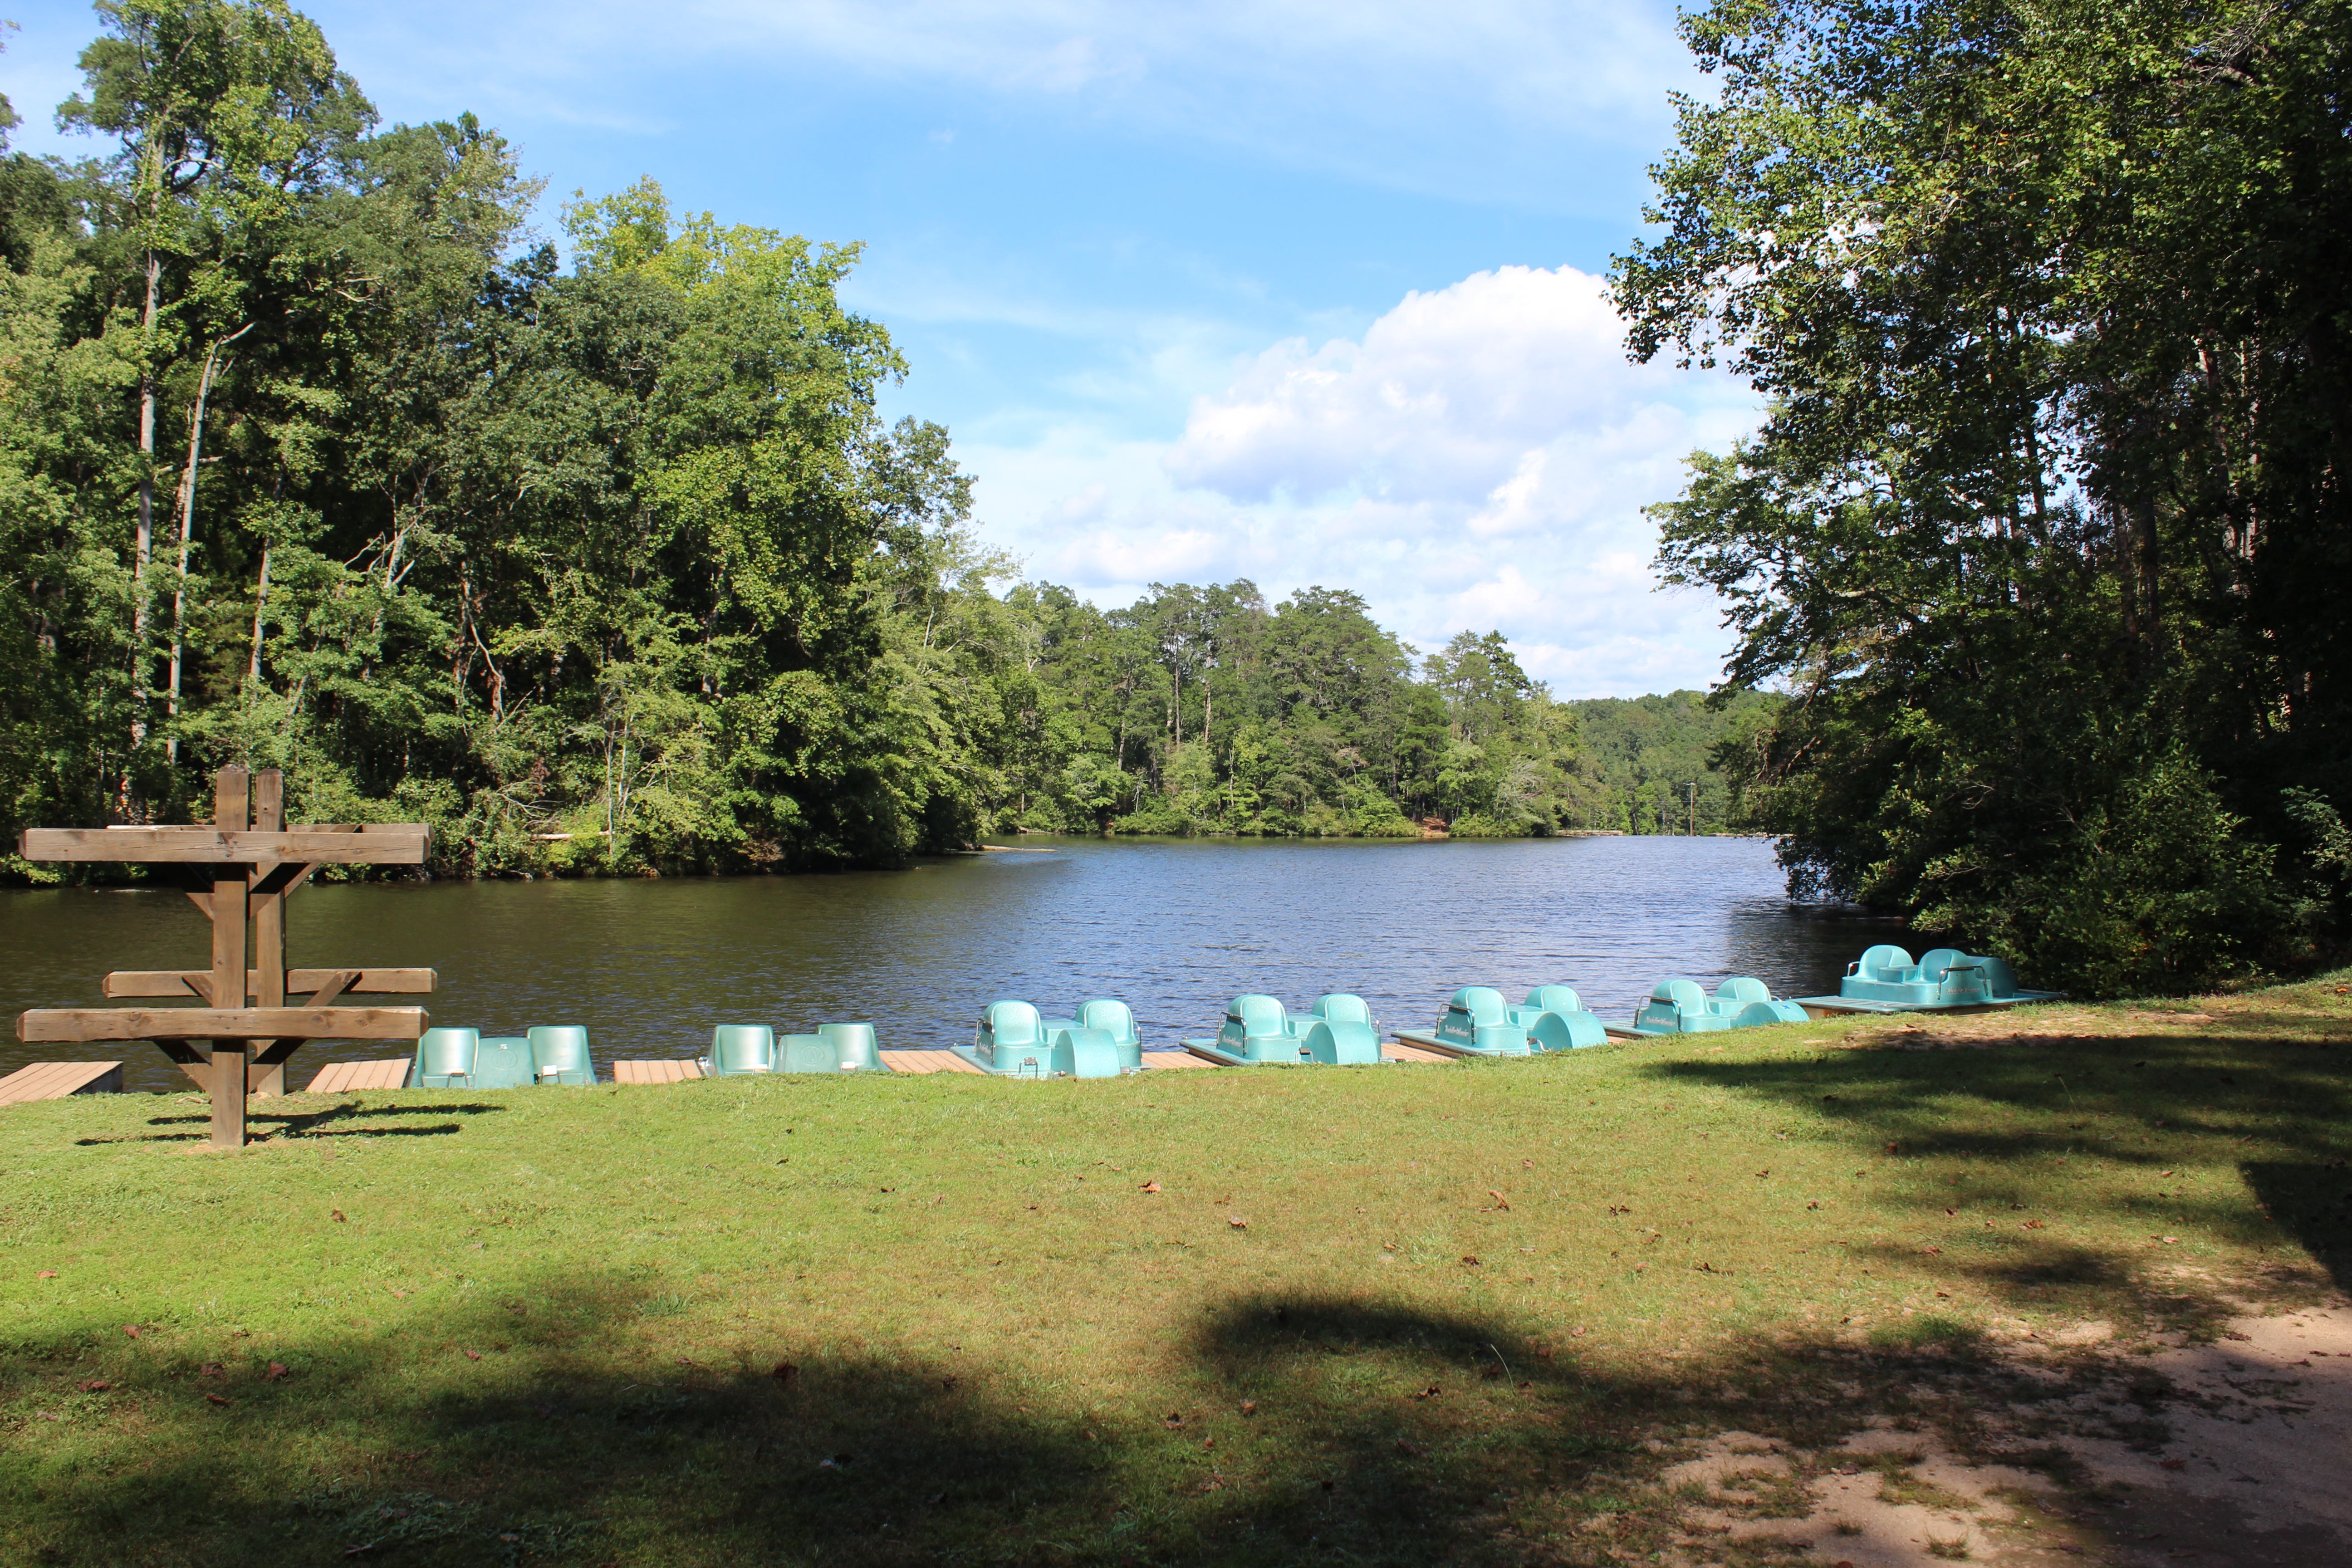 Paddle boats available for rent